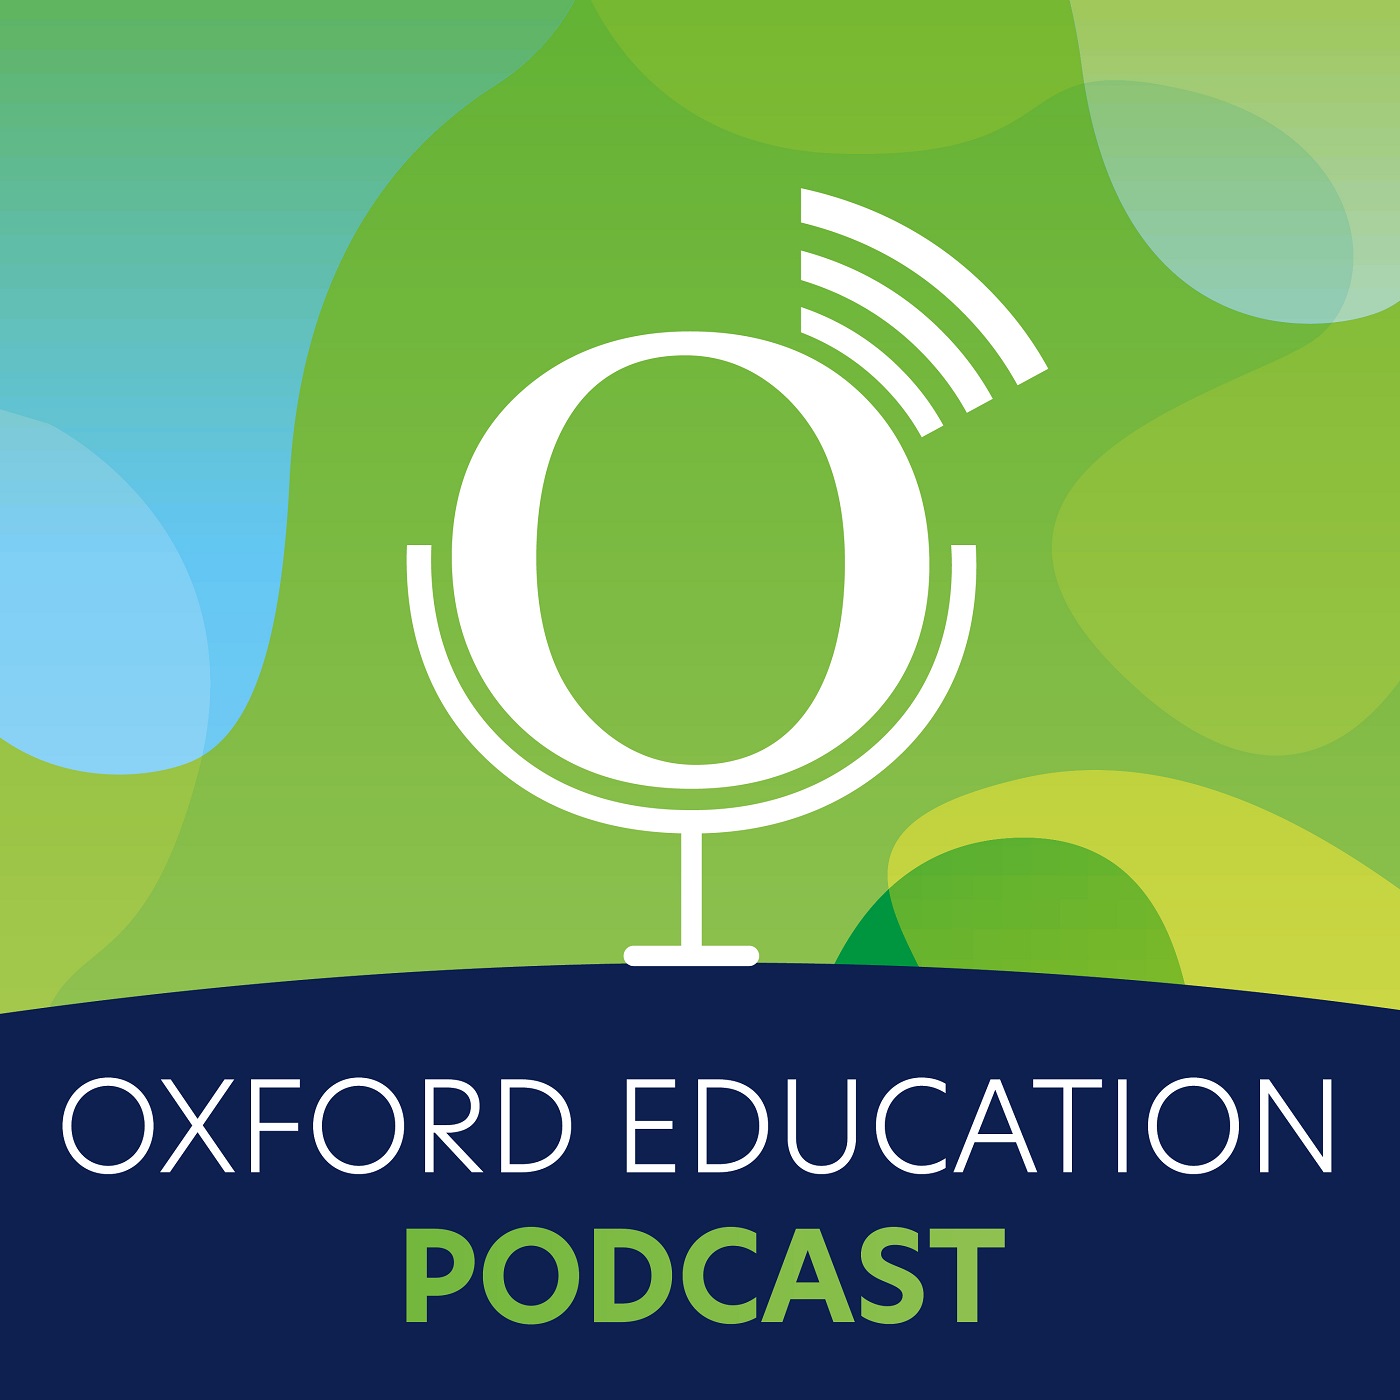 Oxford Education Podcast